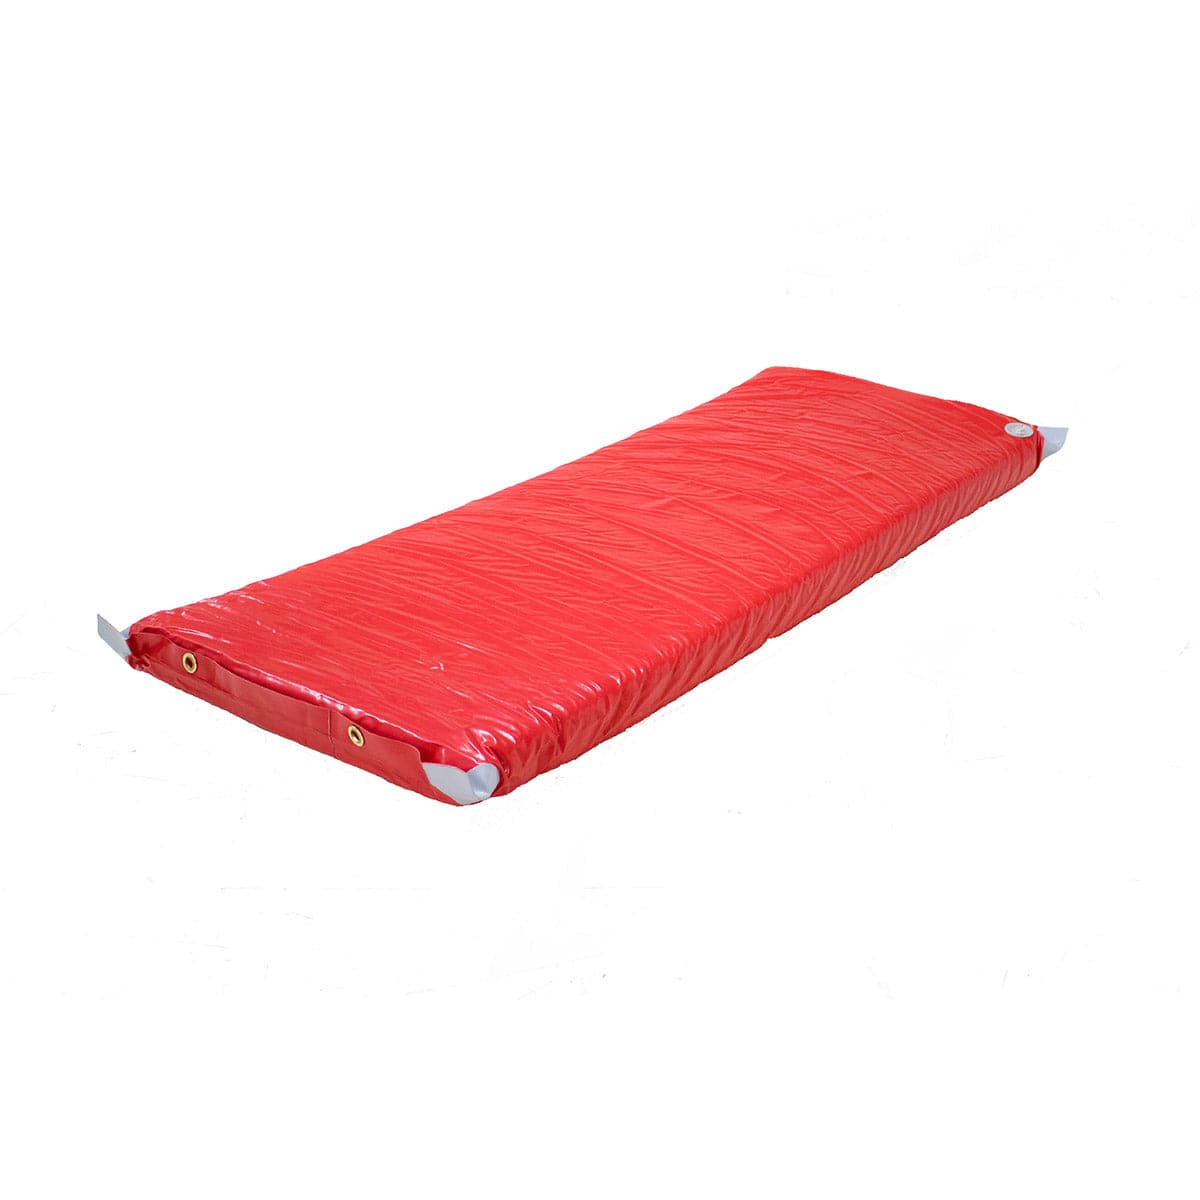 Featuring the Landing Pad Ultra paco pad, sleep pad manufactured by AIRE shown here from one angle.